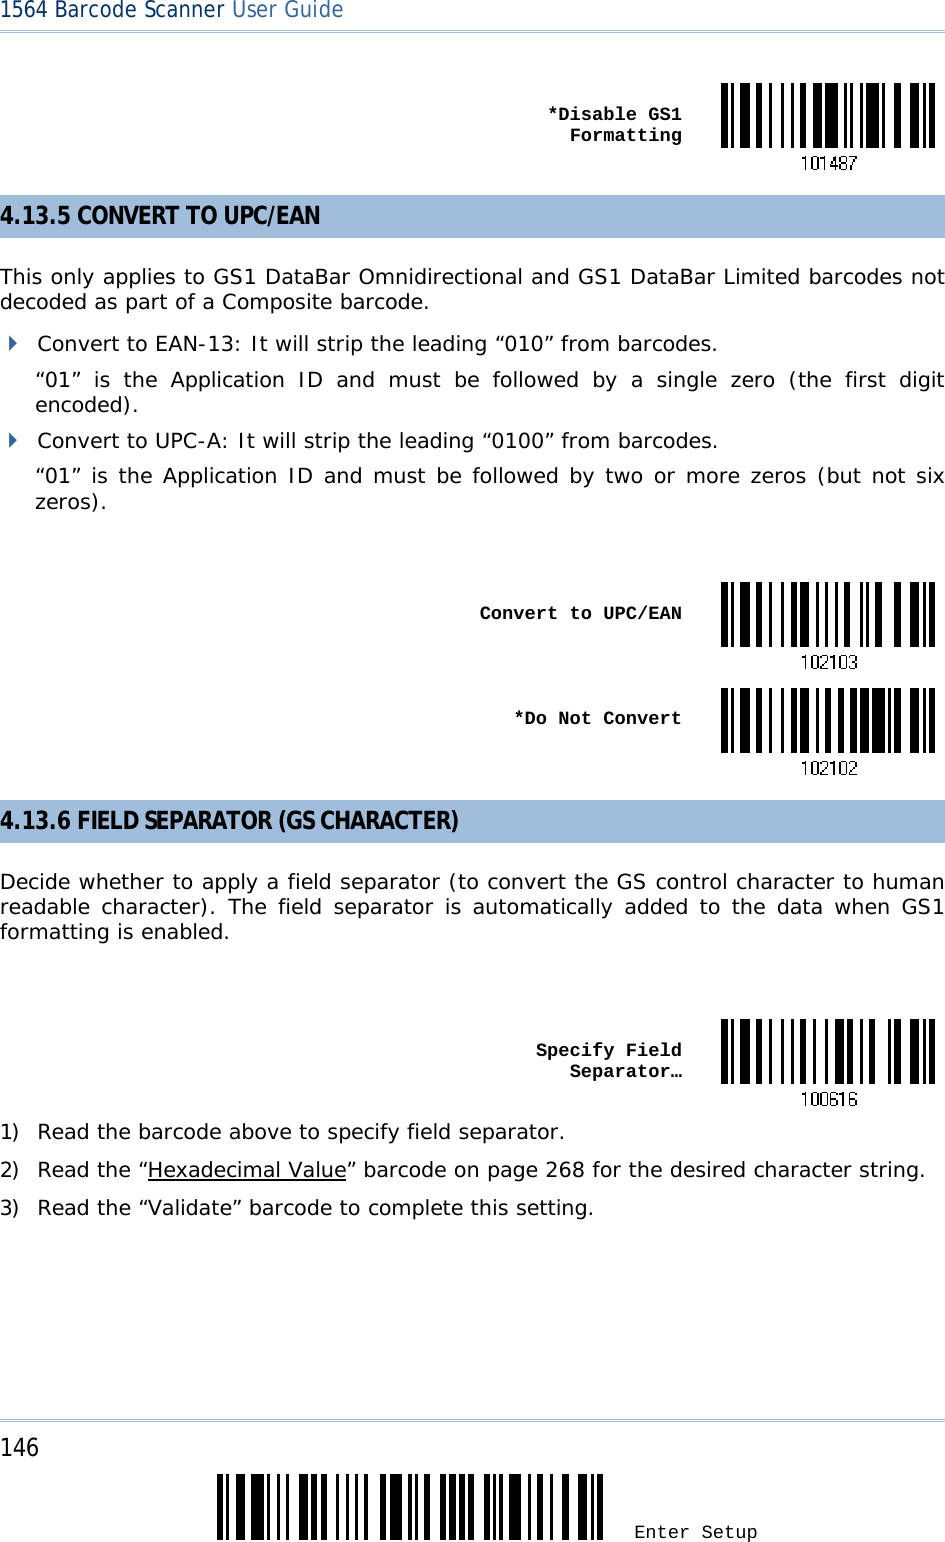 146 Enter Setup 1564 Barcode Scanner User Guide   *Disable GS1 Formatting4.13.5 CONVERT TO UPC/EAN This only applies to GS1 DataBar Omnidirectional and GS1 DataBar Limited barcodes not decoded as part of a Composite barcode.  Convert to EAN-13: It will strip the leading “010” from barcodes.  “01” is the Application ID and must be followed by a single zero (the first digit encoded).  Convert to UPC-A: It will strip the leading “0100” from barcodes.  “01” is the Application ID and must be followed by two or more zeros (but not six zeros).   Convert to UPC/EAN *Do Not Convert4.13.6 FIELD SEPARATOR (GS CHARACTER) Decide whether to apply a field separator (to convert the GS control character to human readable character). The field separator is automatically added to the data when GS1 formatting is enabled.   Specify Field Separator…1) Read the barcode above to specify field separator. 2) Read the “Hexadecimal Value” barcode on page 268 for the desired character string.  3) Read the “Validate” barcode to complete this setting. 